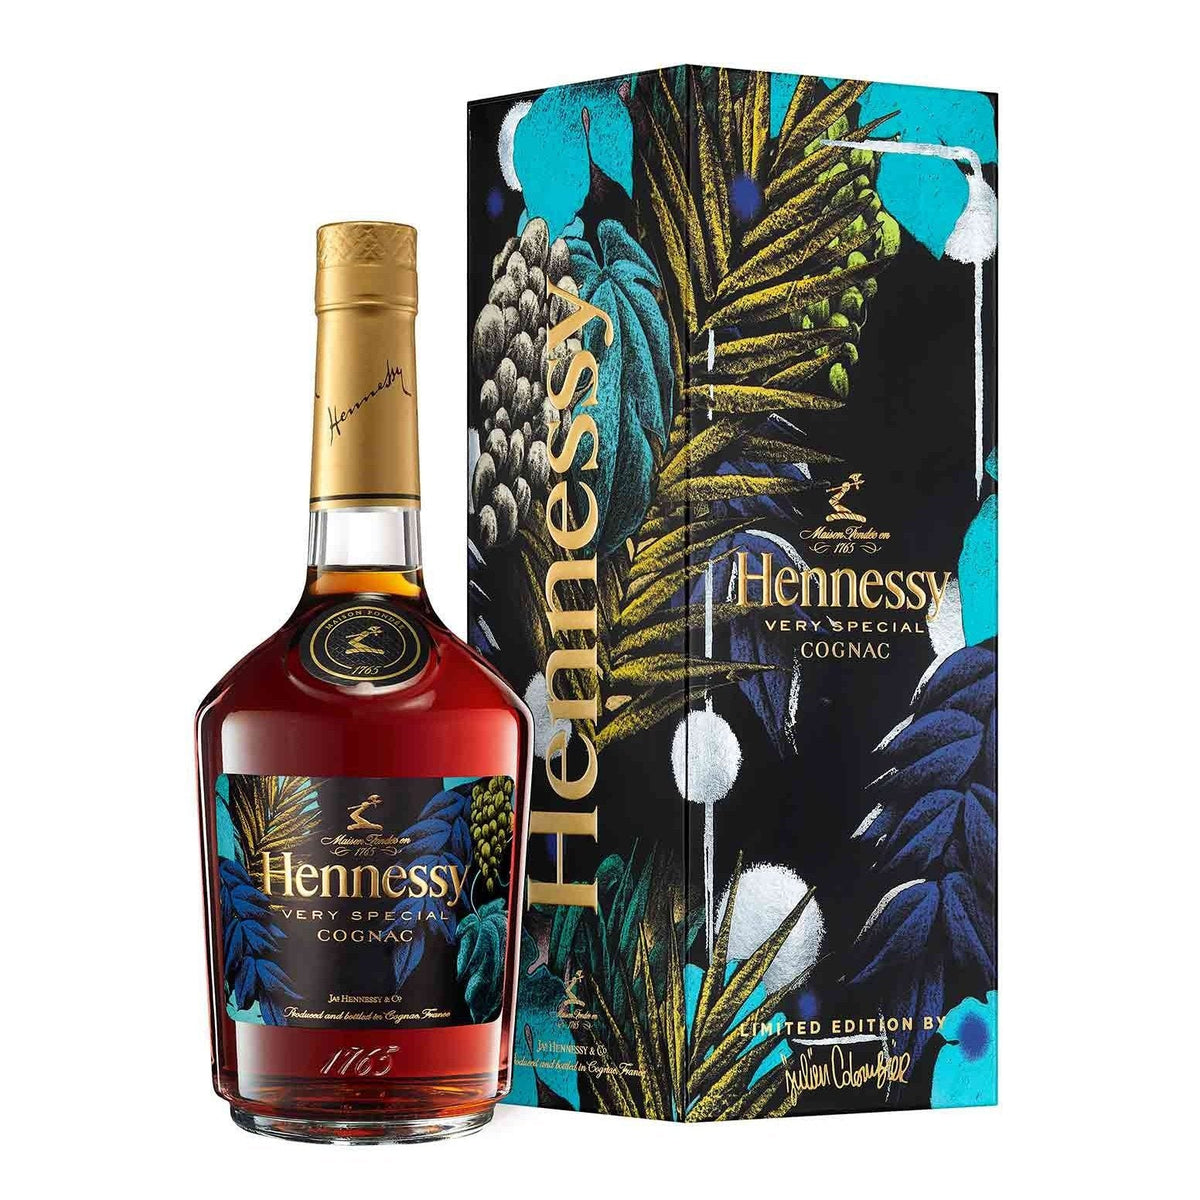 Hennessy VS Cognac Limited Edition by Julien Colombier 750ml